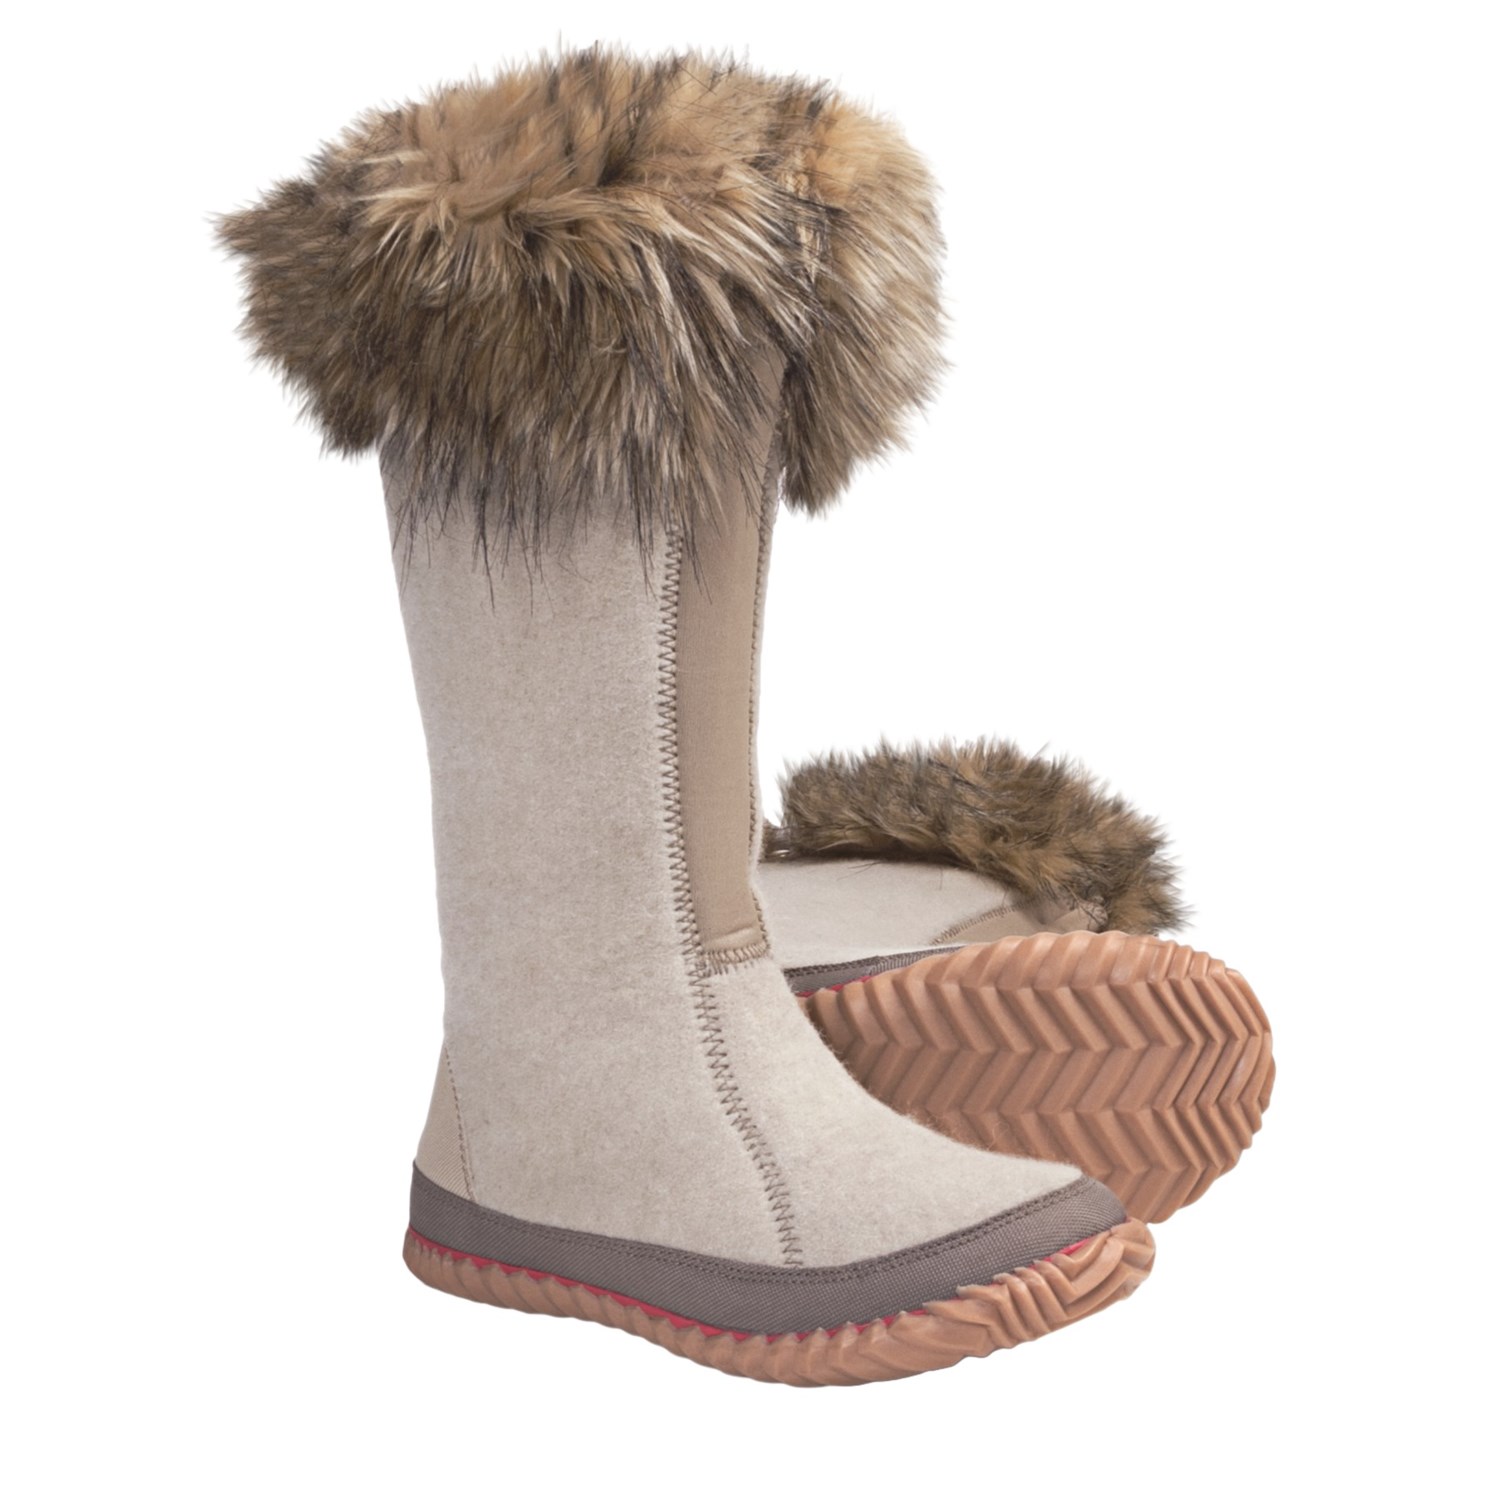 http://i.stpost.com/sorel-cozy-joan-tall-boots-recycled-felt-for-women-in-natural~p~5565a_01~1500.3.jpg